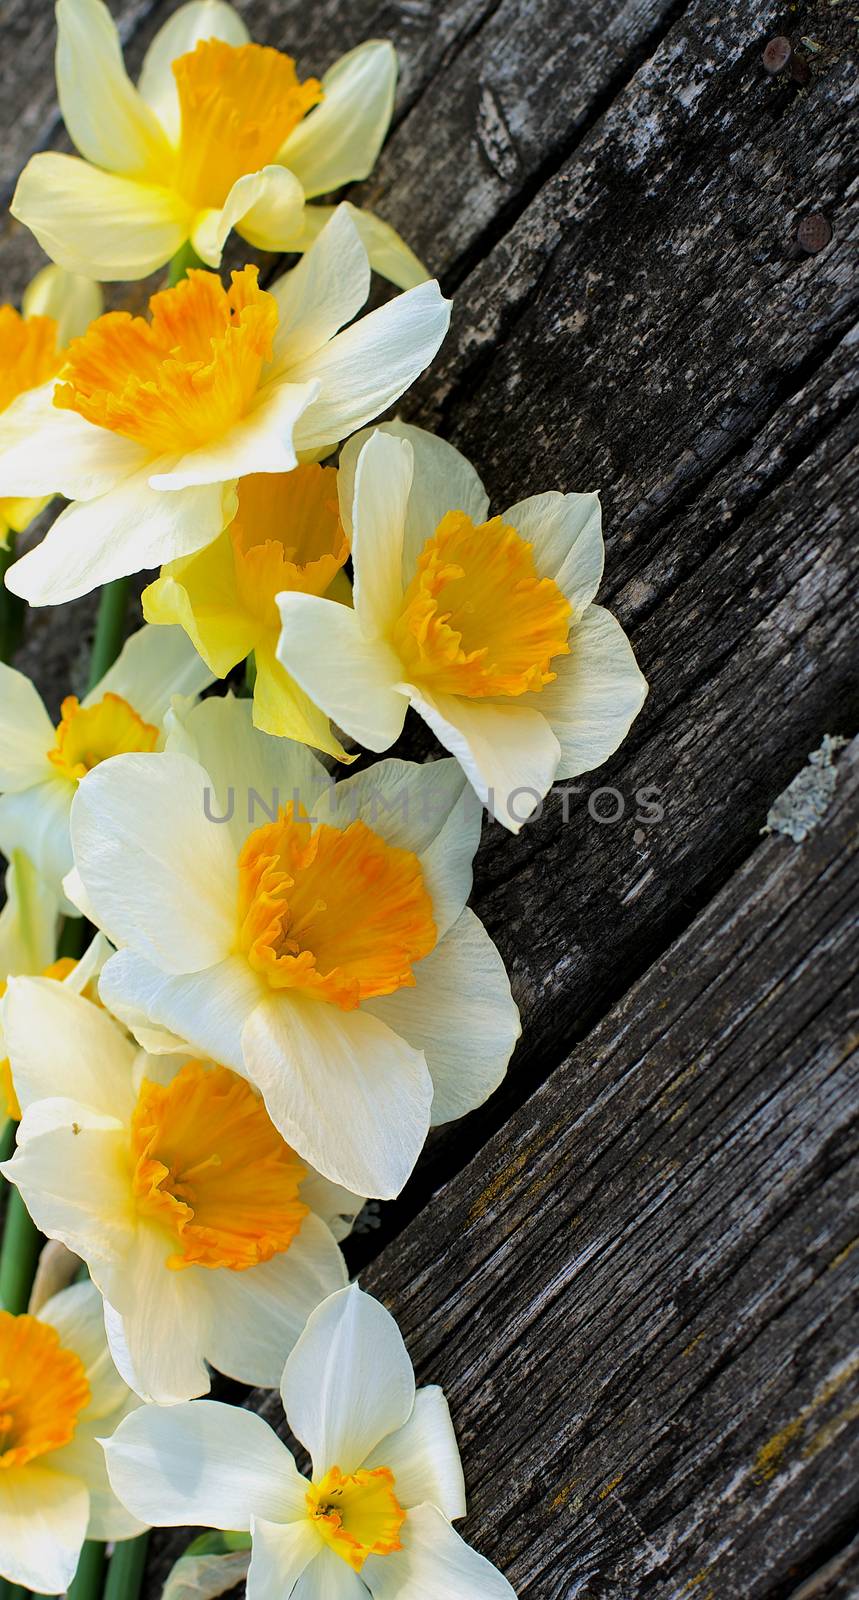 Arrangement of Spring Yellow Daffodils In a Row closeup on  Weathered Wood background